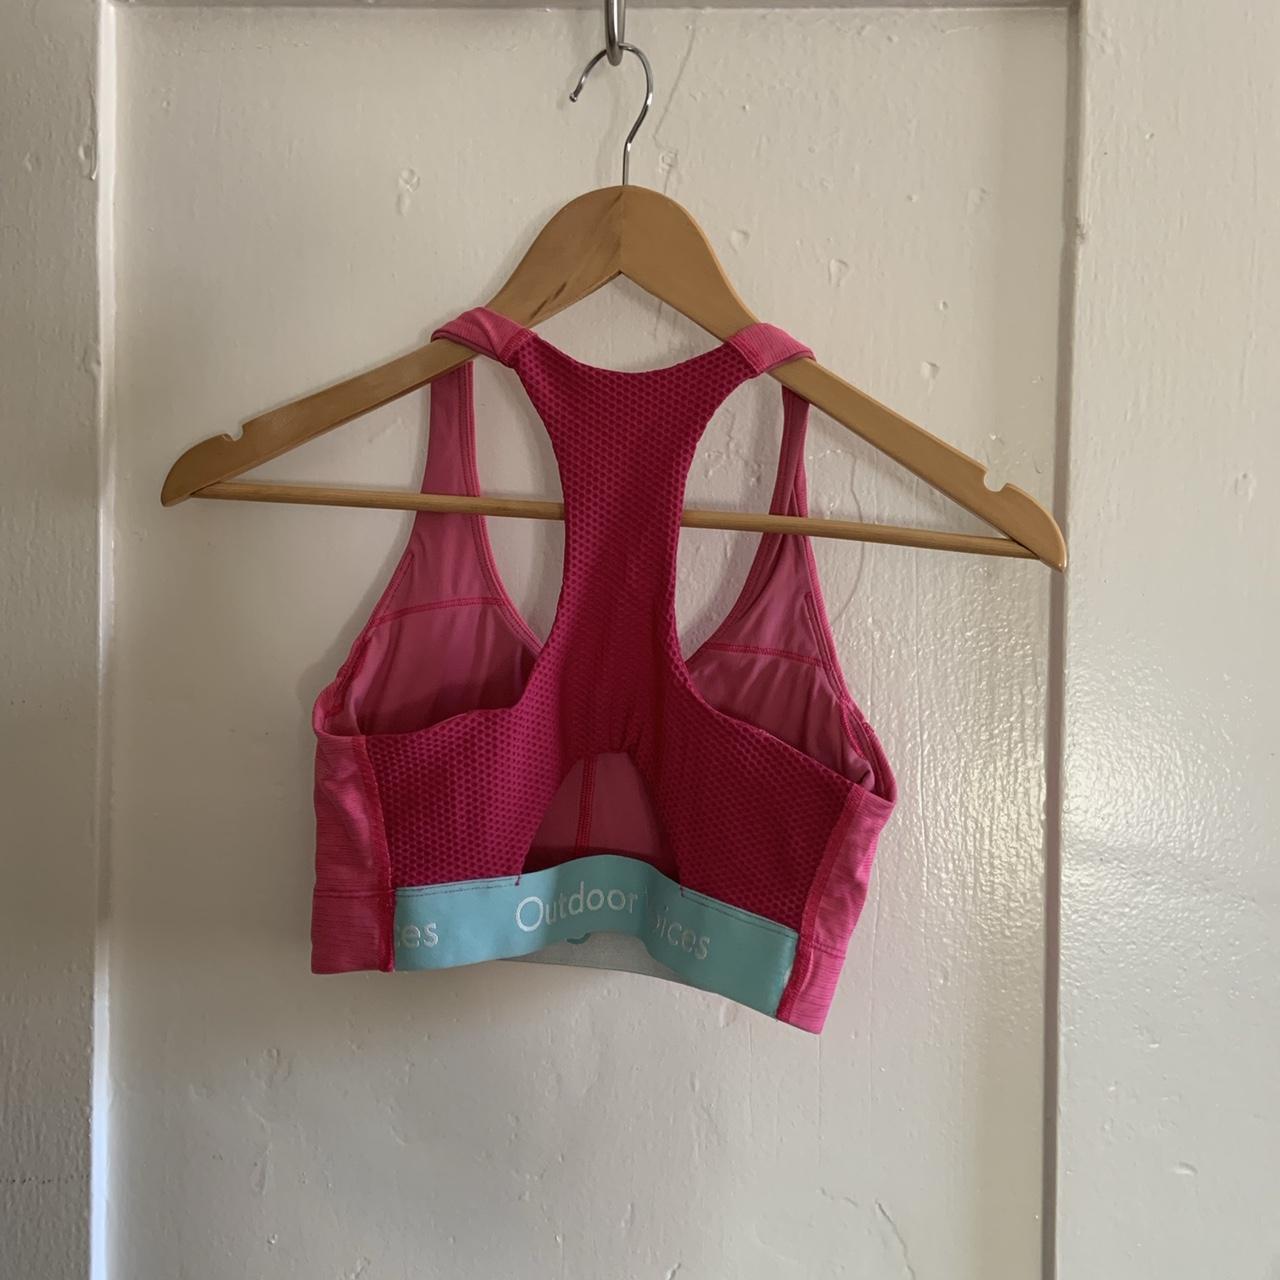 Outdoor voices doing things bra. Excellent used... - Depop